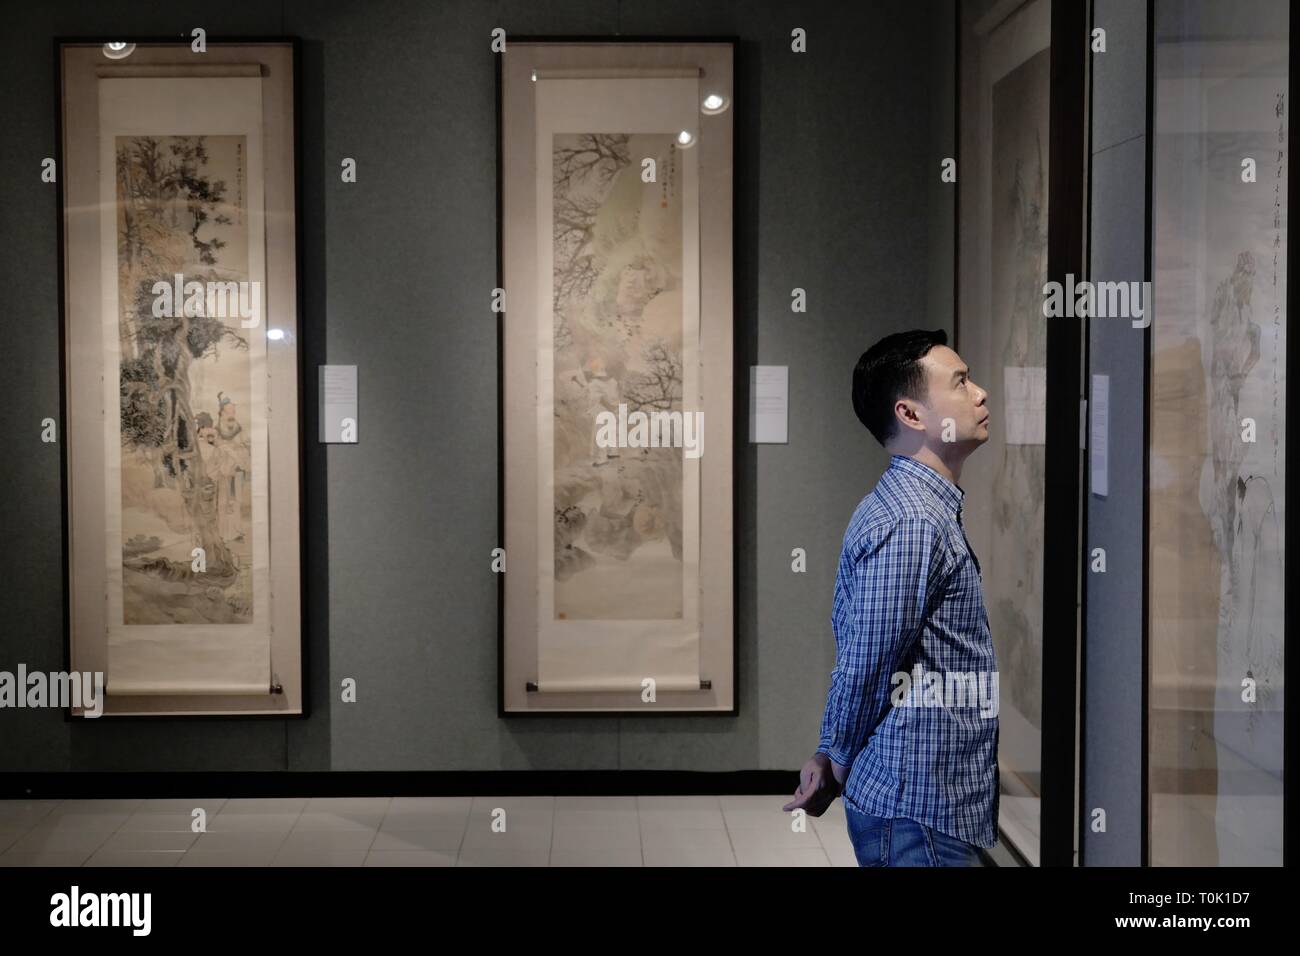 Hong Kong, China. 20th Mar, 2019. A visitor views a painting during an exhibition of Ren Bonian, a famous modern Chinese painter, at Chinese University of Hong Kong, in Hong Kong, south China, March 20, 2019. A total of 82 paintings by Ren Bonian were displayed on the exhibition. Credit: Wang Shen/Xinhua/Alamy Live News Stock Photo